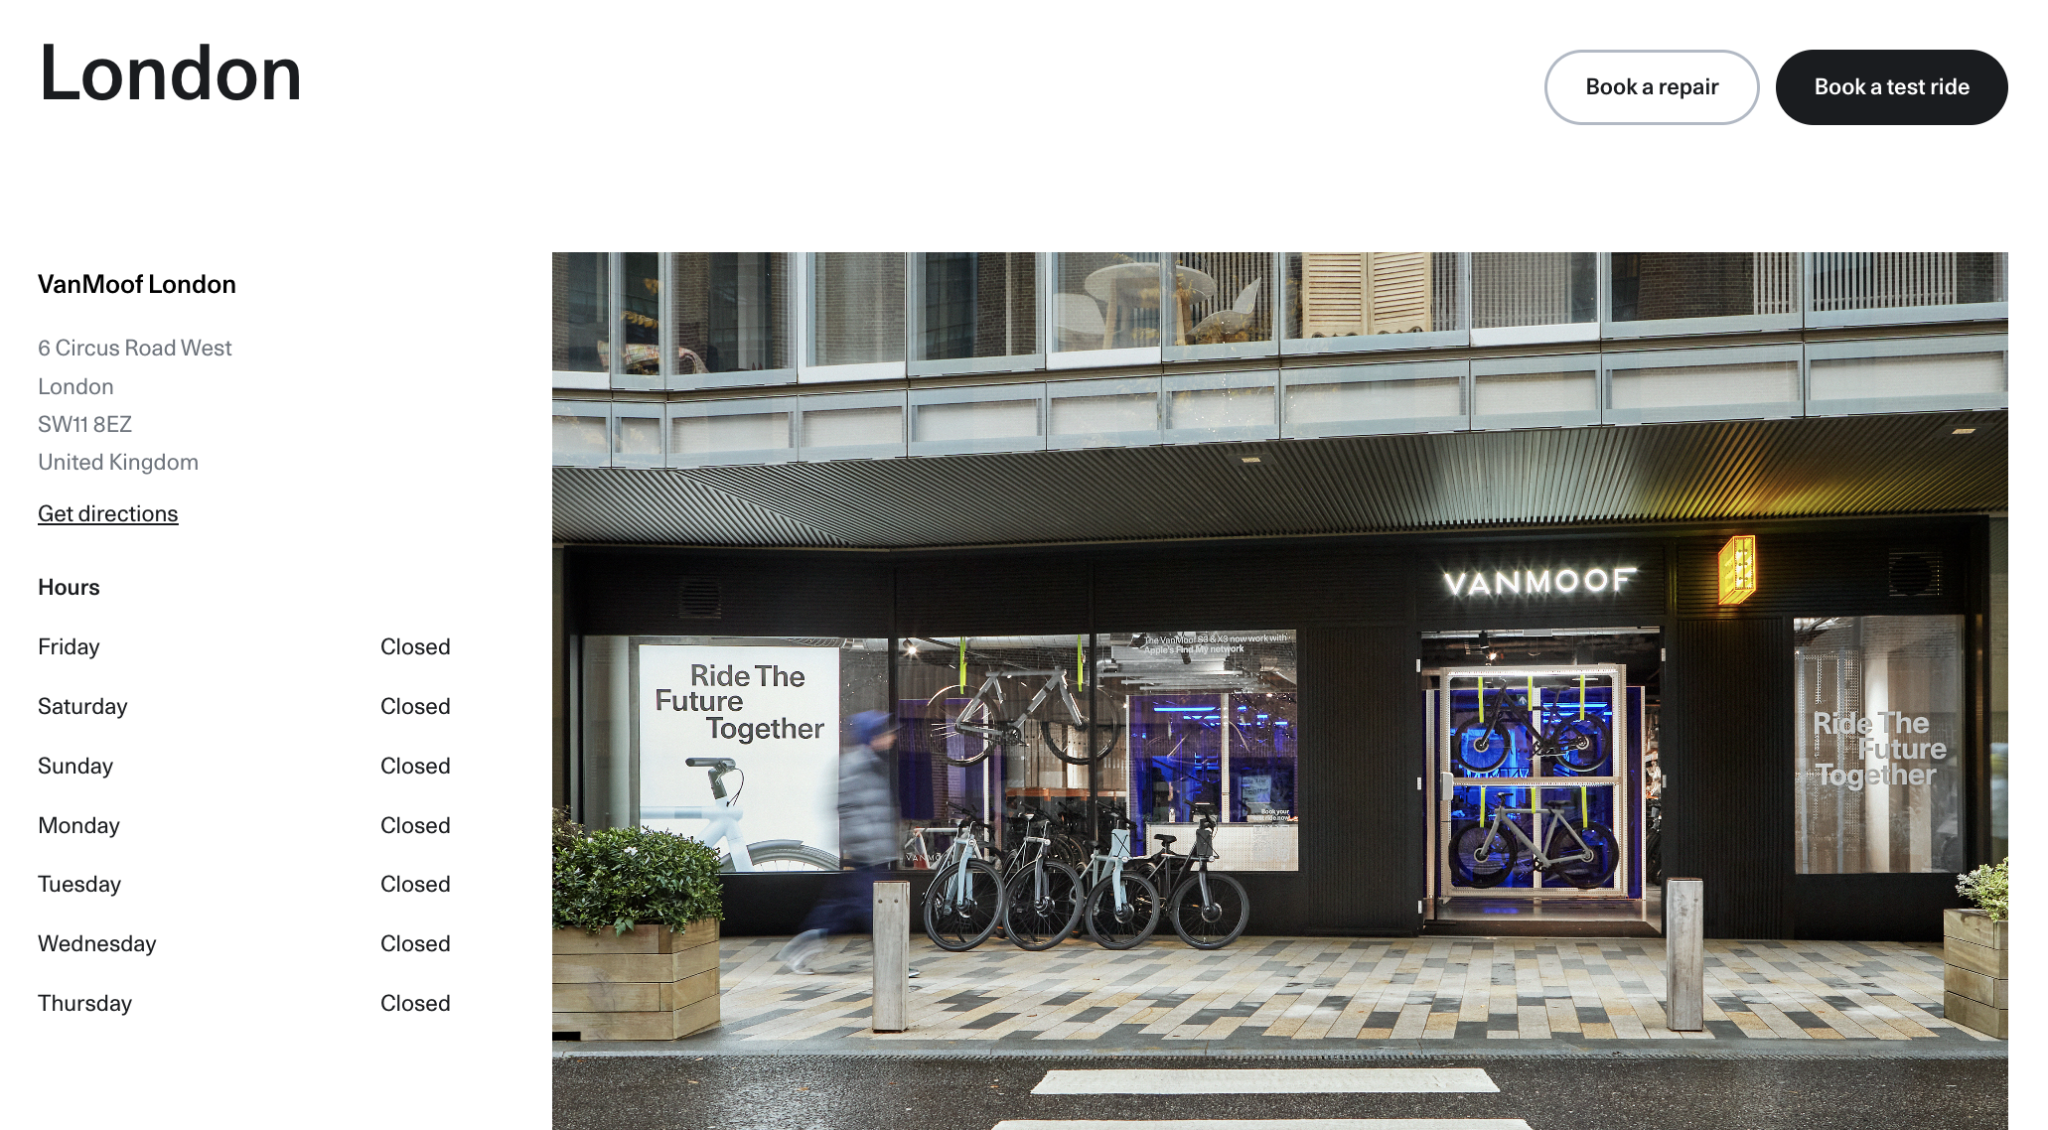 A screenshot of the VanMoof website showing the London Battersea store as closed.